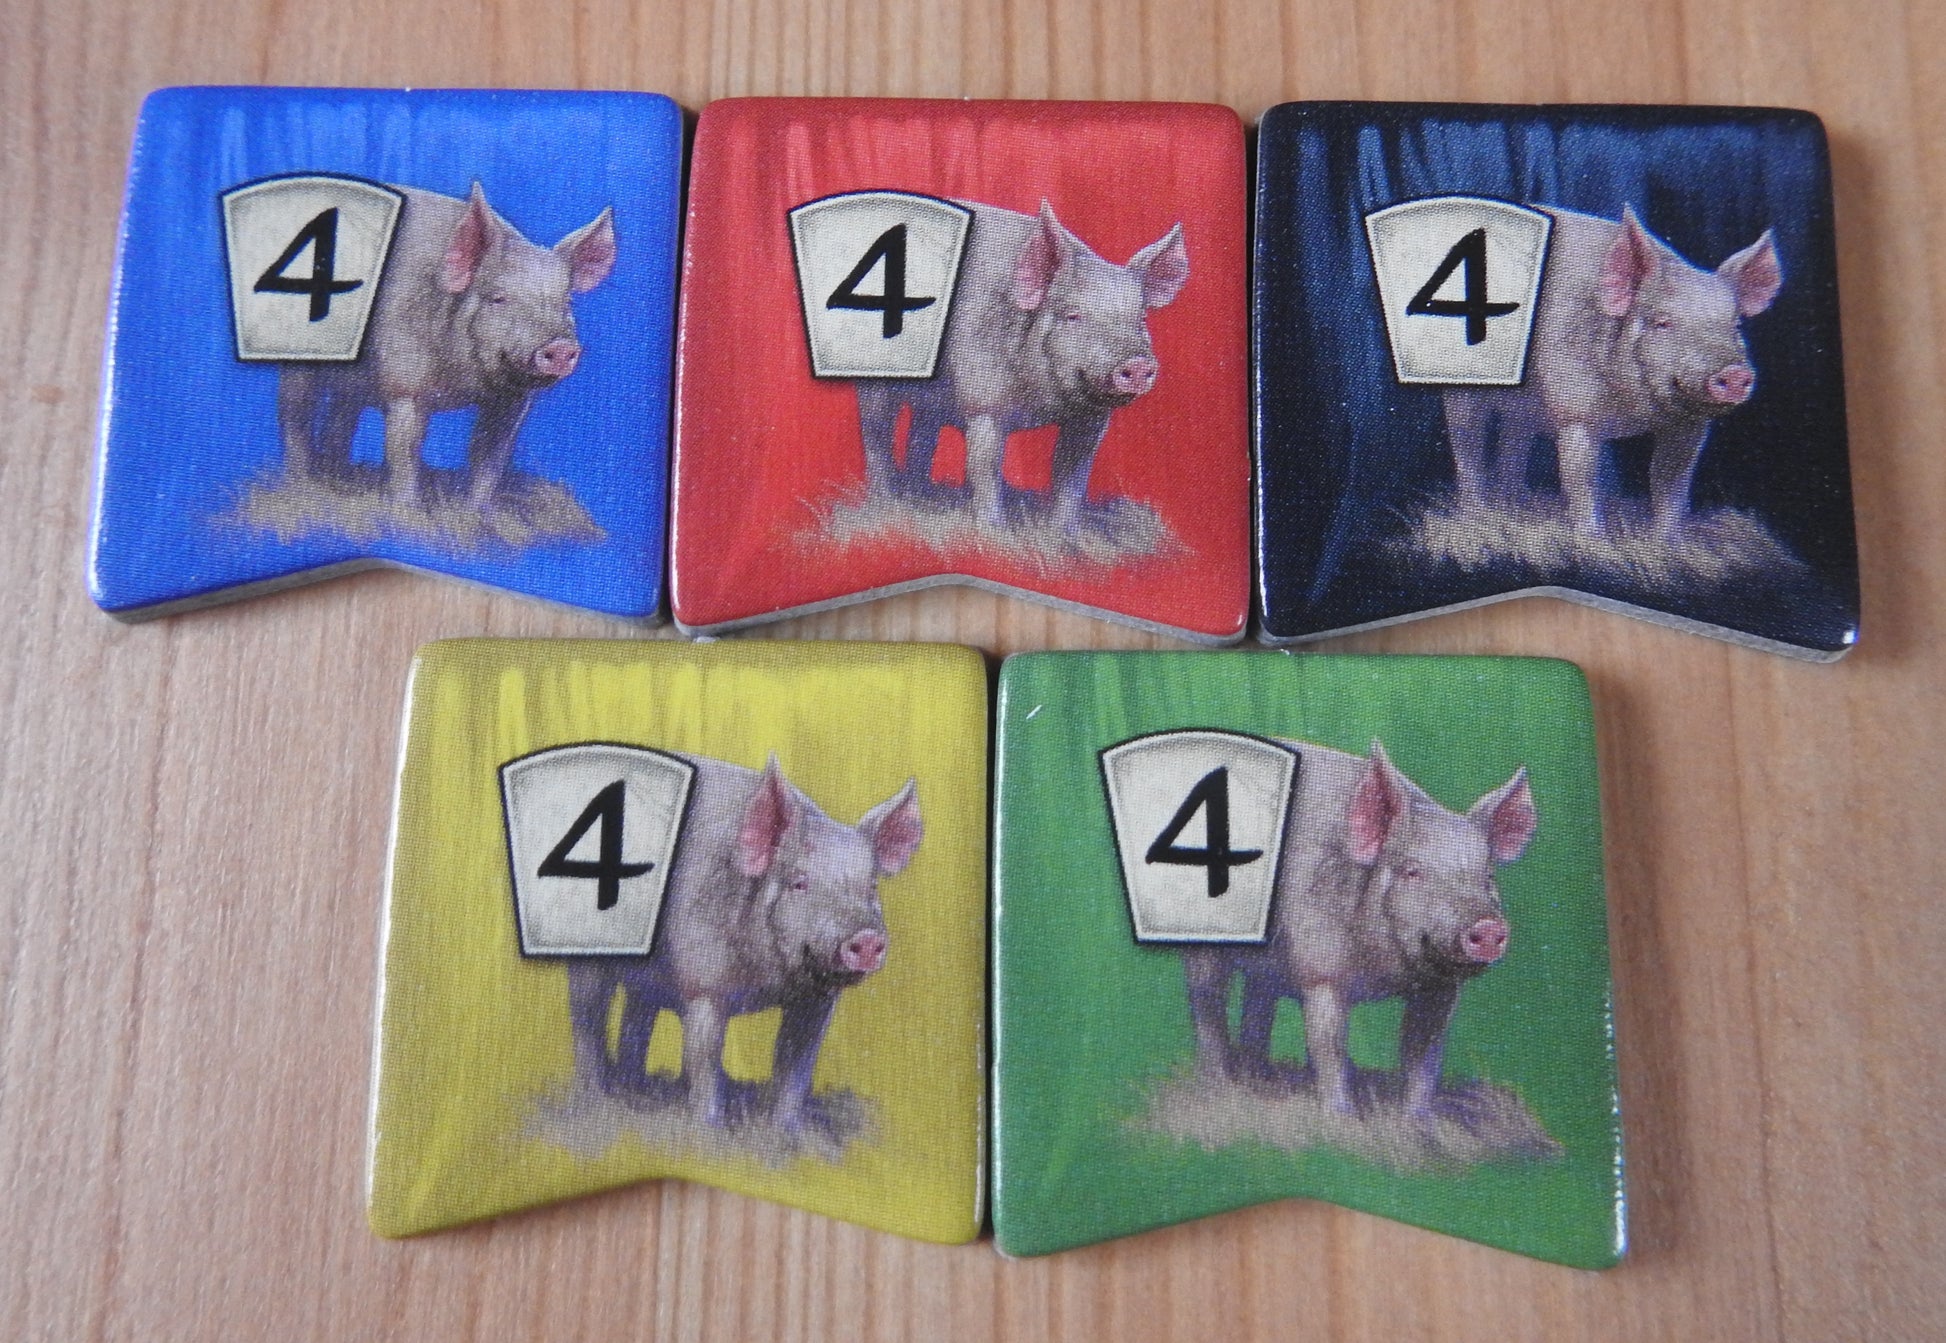 Close-up view of the 5 pig tokens in the different colours - blue, red, black, yellow and green.